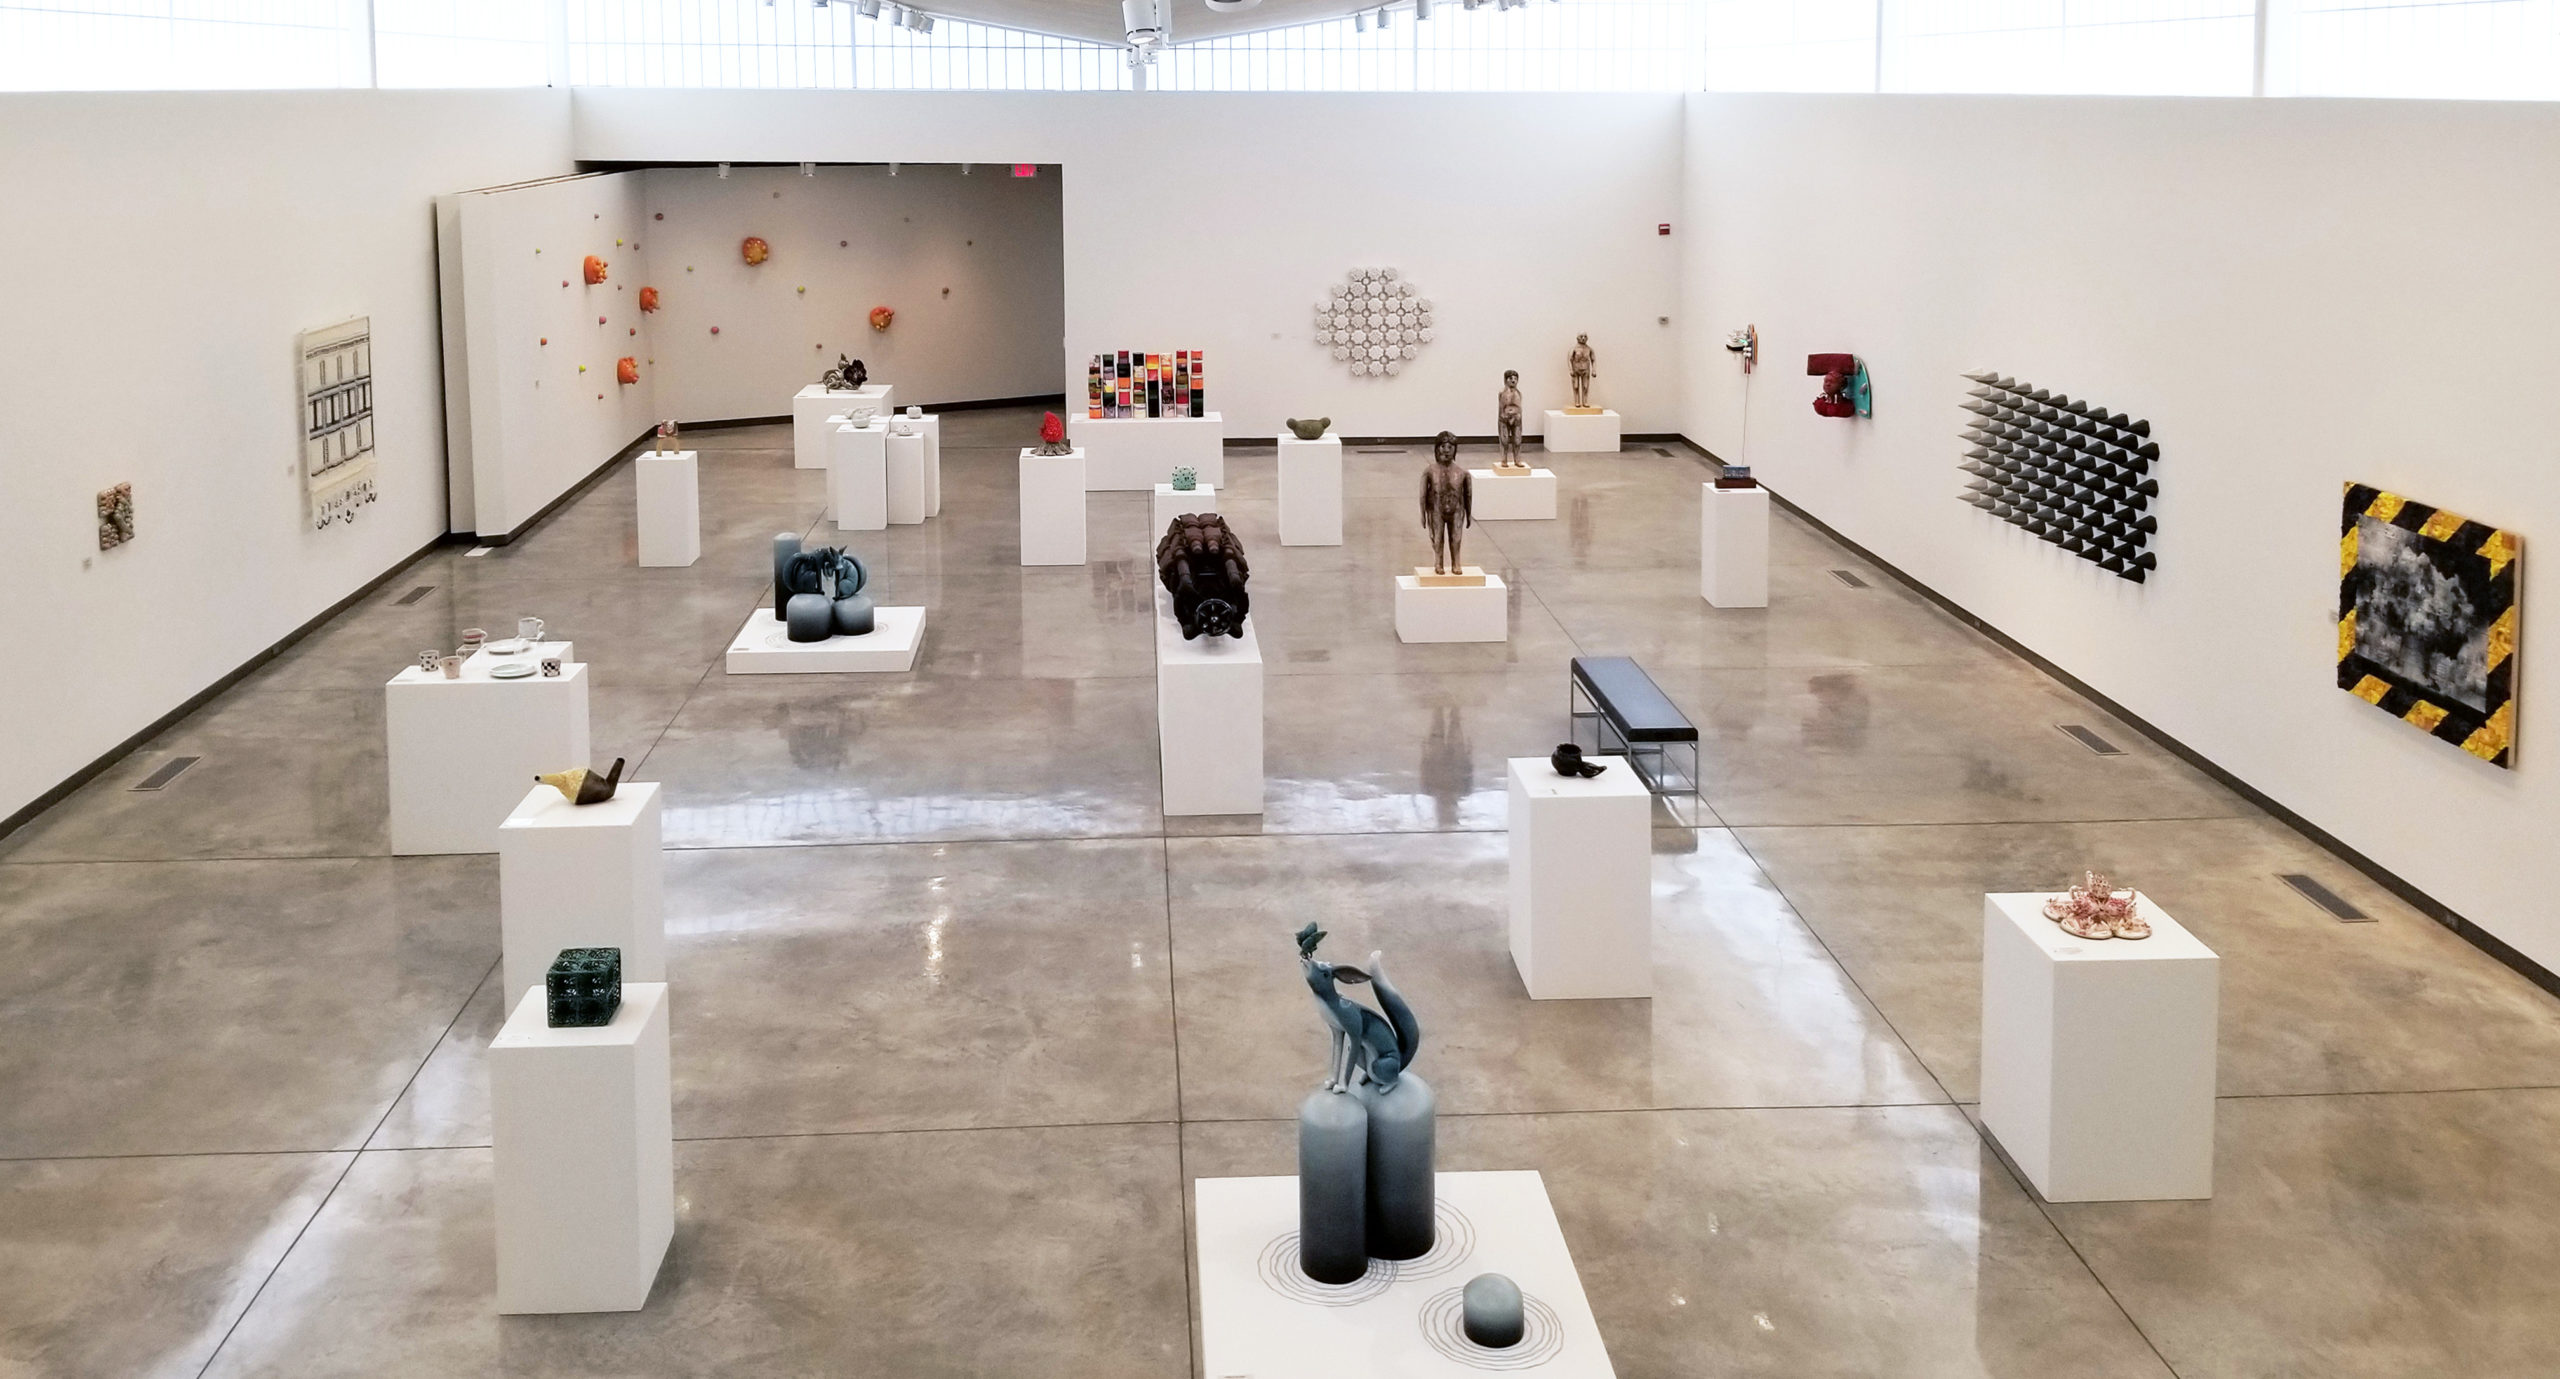 Installation View of "Coalescence: Exploring Contemporary Ceramics and Artist Communities".